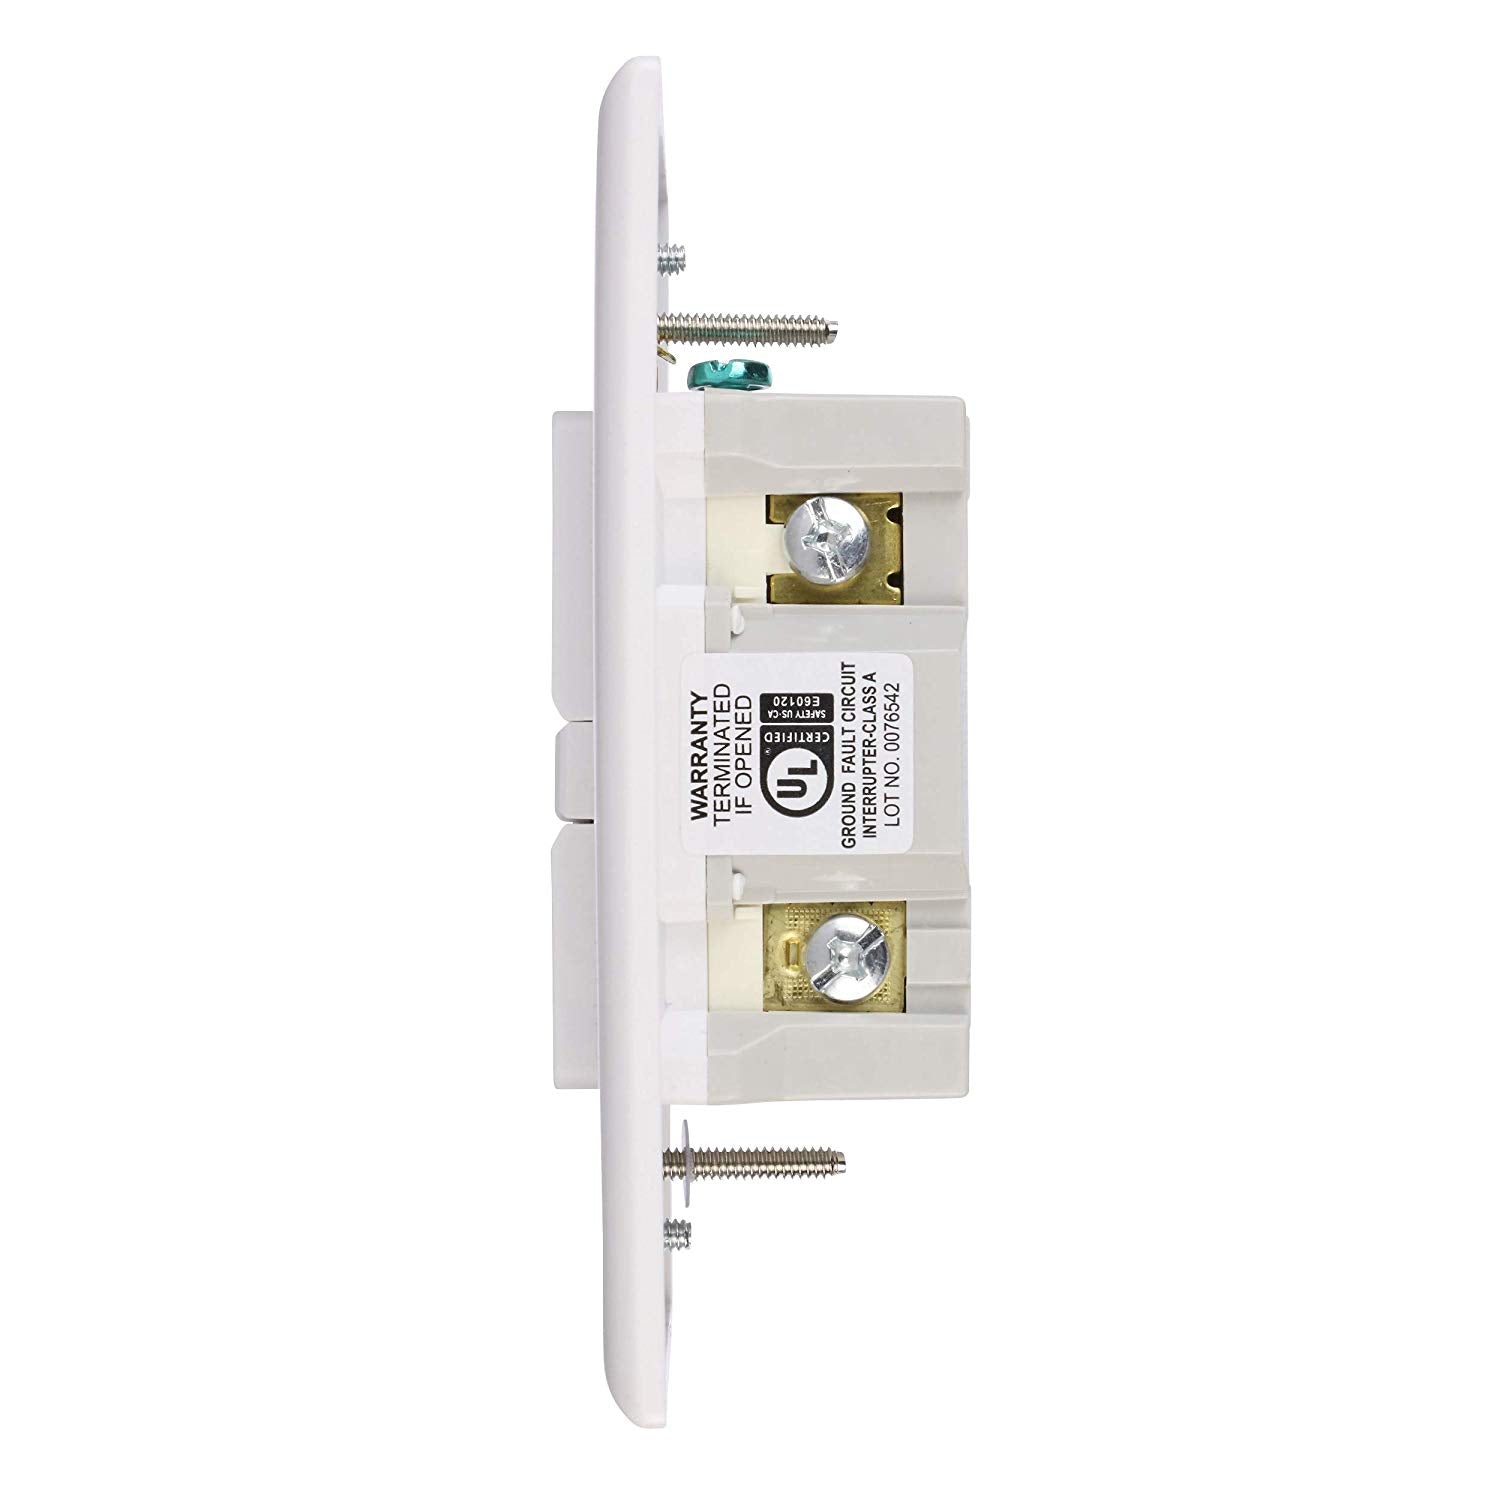 Eaton GFCI Self-Test 15A/20A -125V Tamper Resistant Duplex Receptacle with Standard Size Wallplate, White - Consavvy